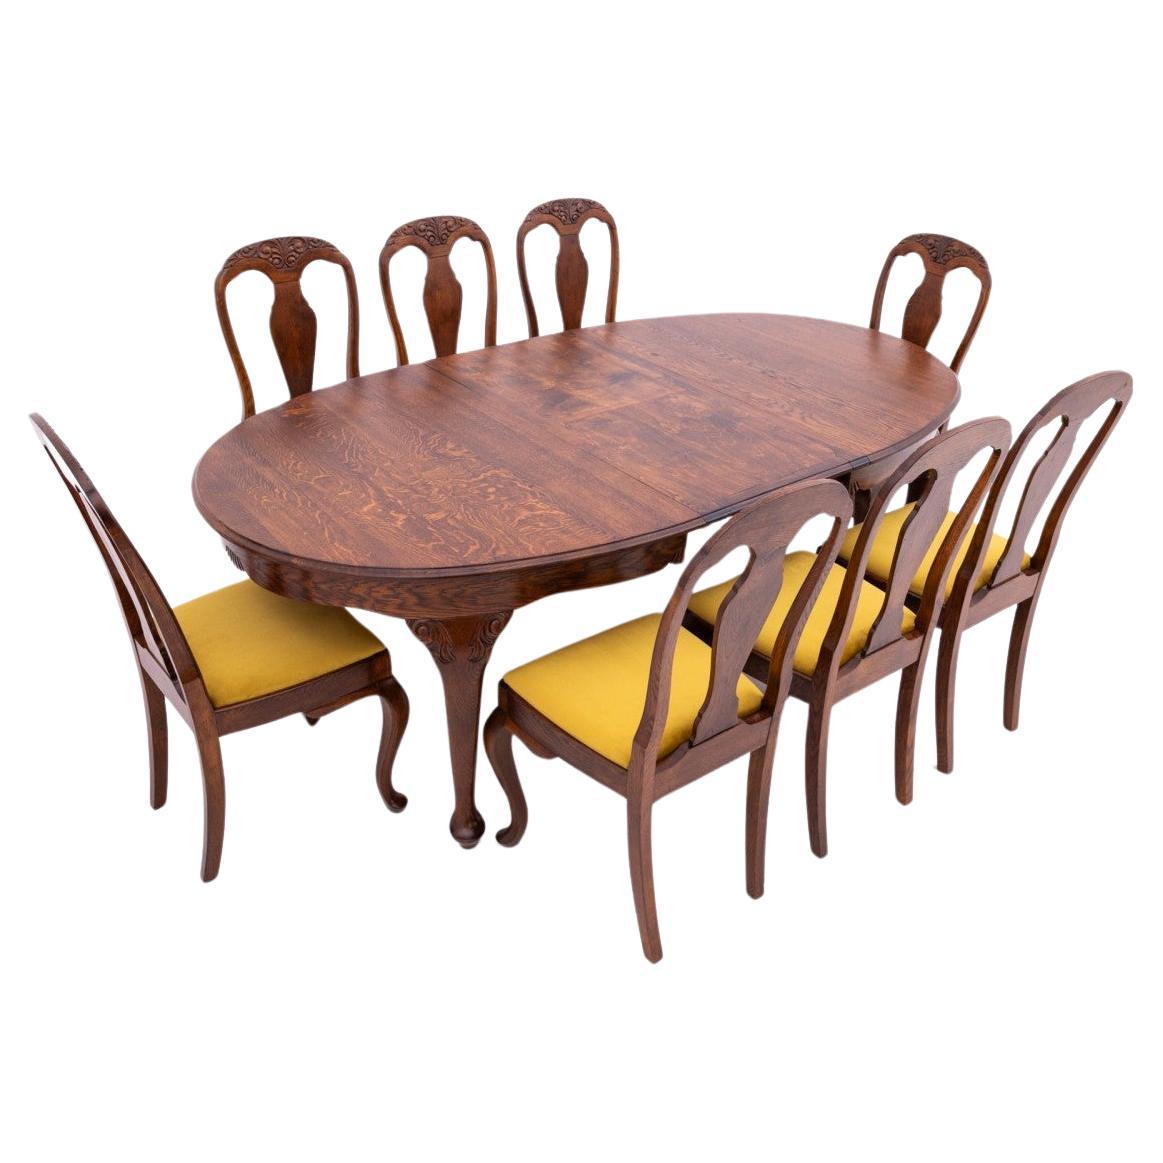 Antique table + 8 chairs, Northern Europe, circa 1920. AFTER RENOVATION For Sale